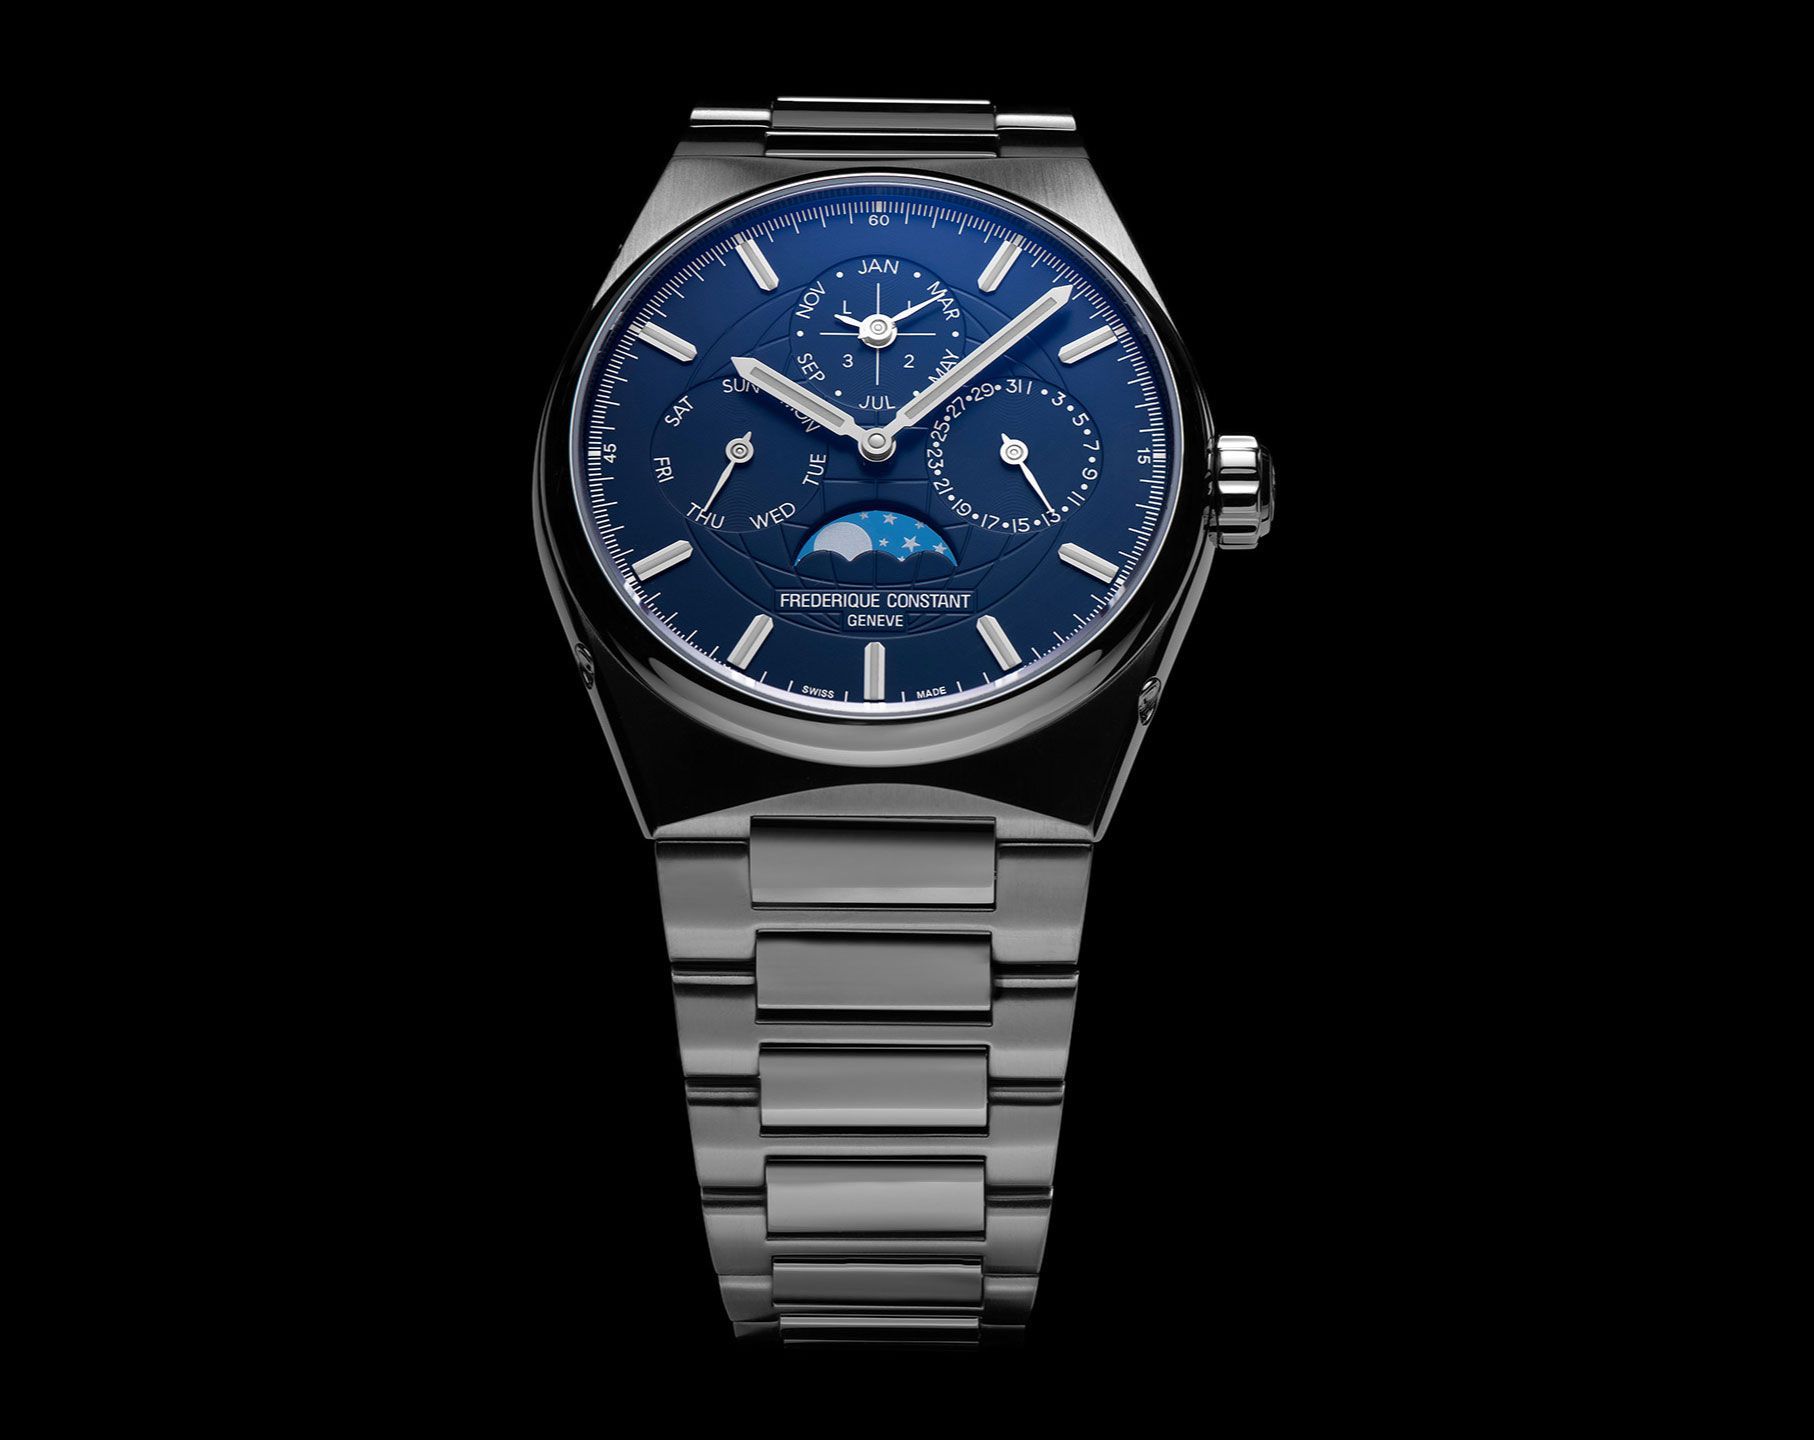 Frederique Constant Highlife Highlife Perpetual Calendar Manufacture Blue Dial 41 mm Automatic Watch For Men - 3